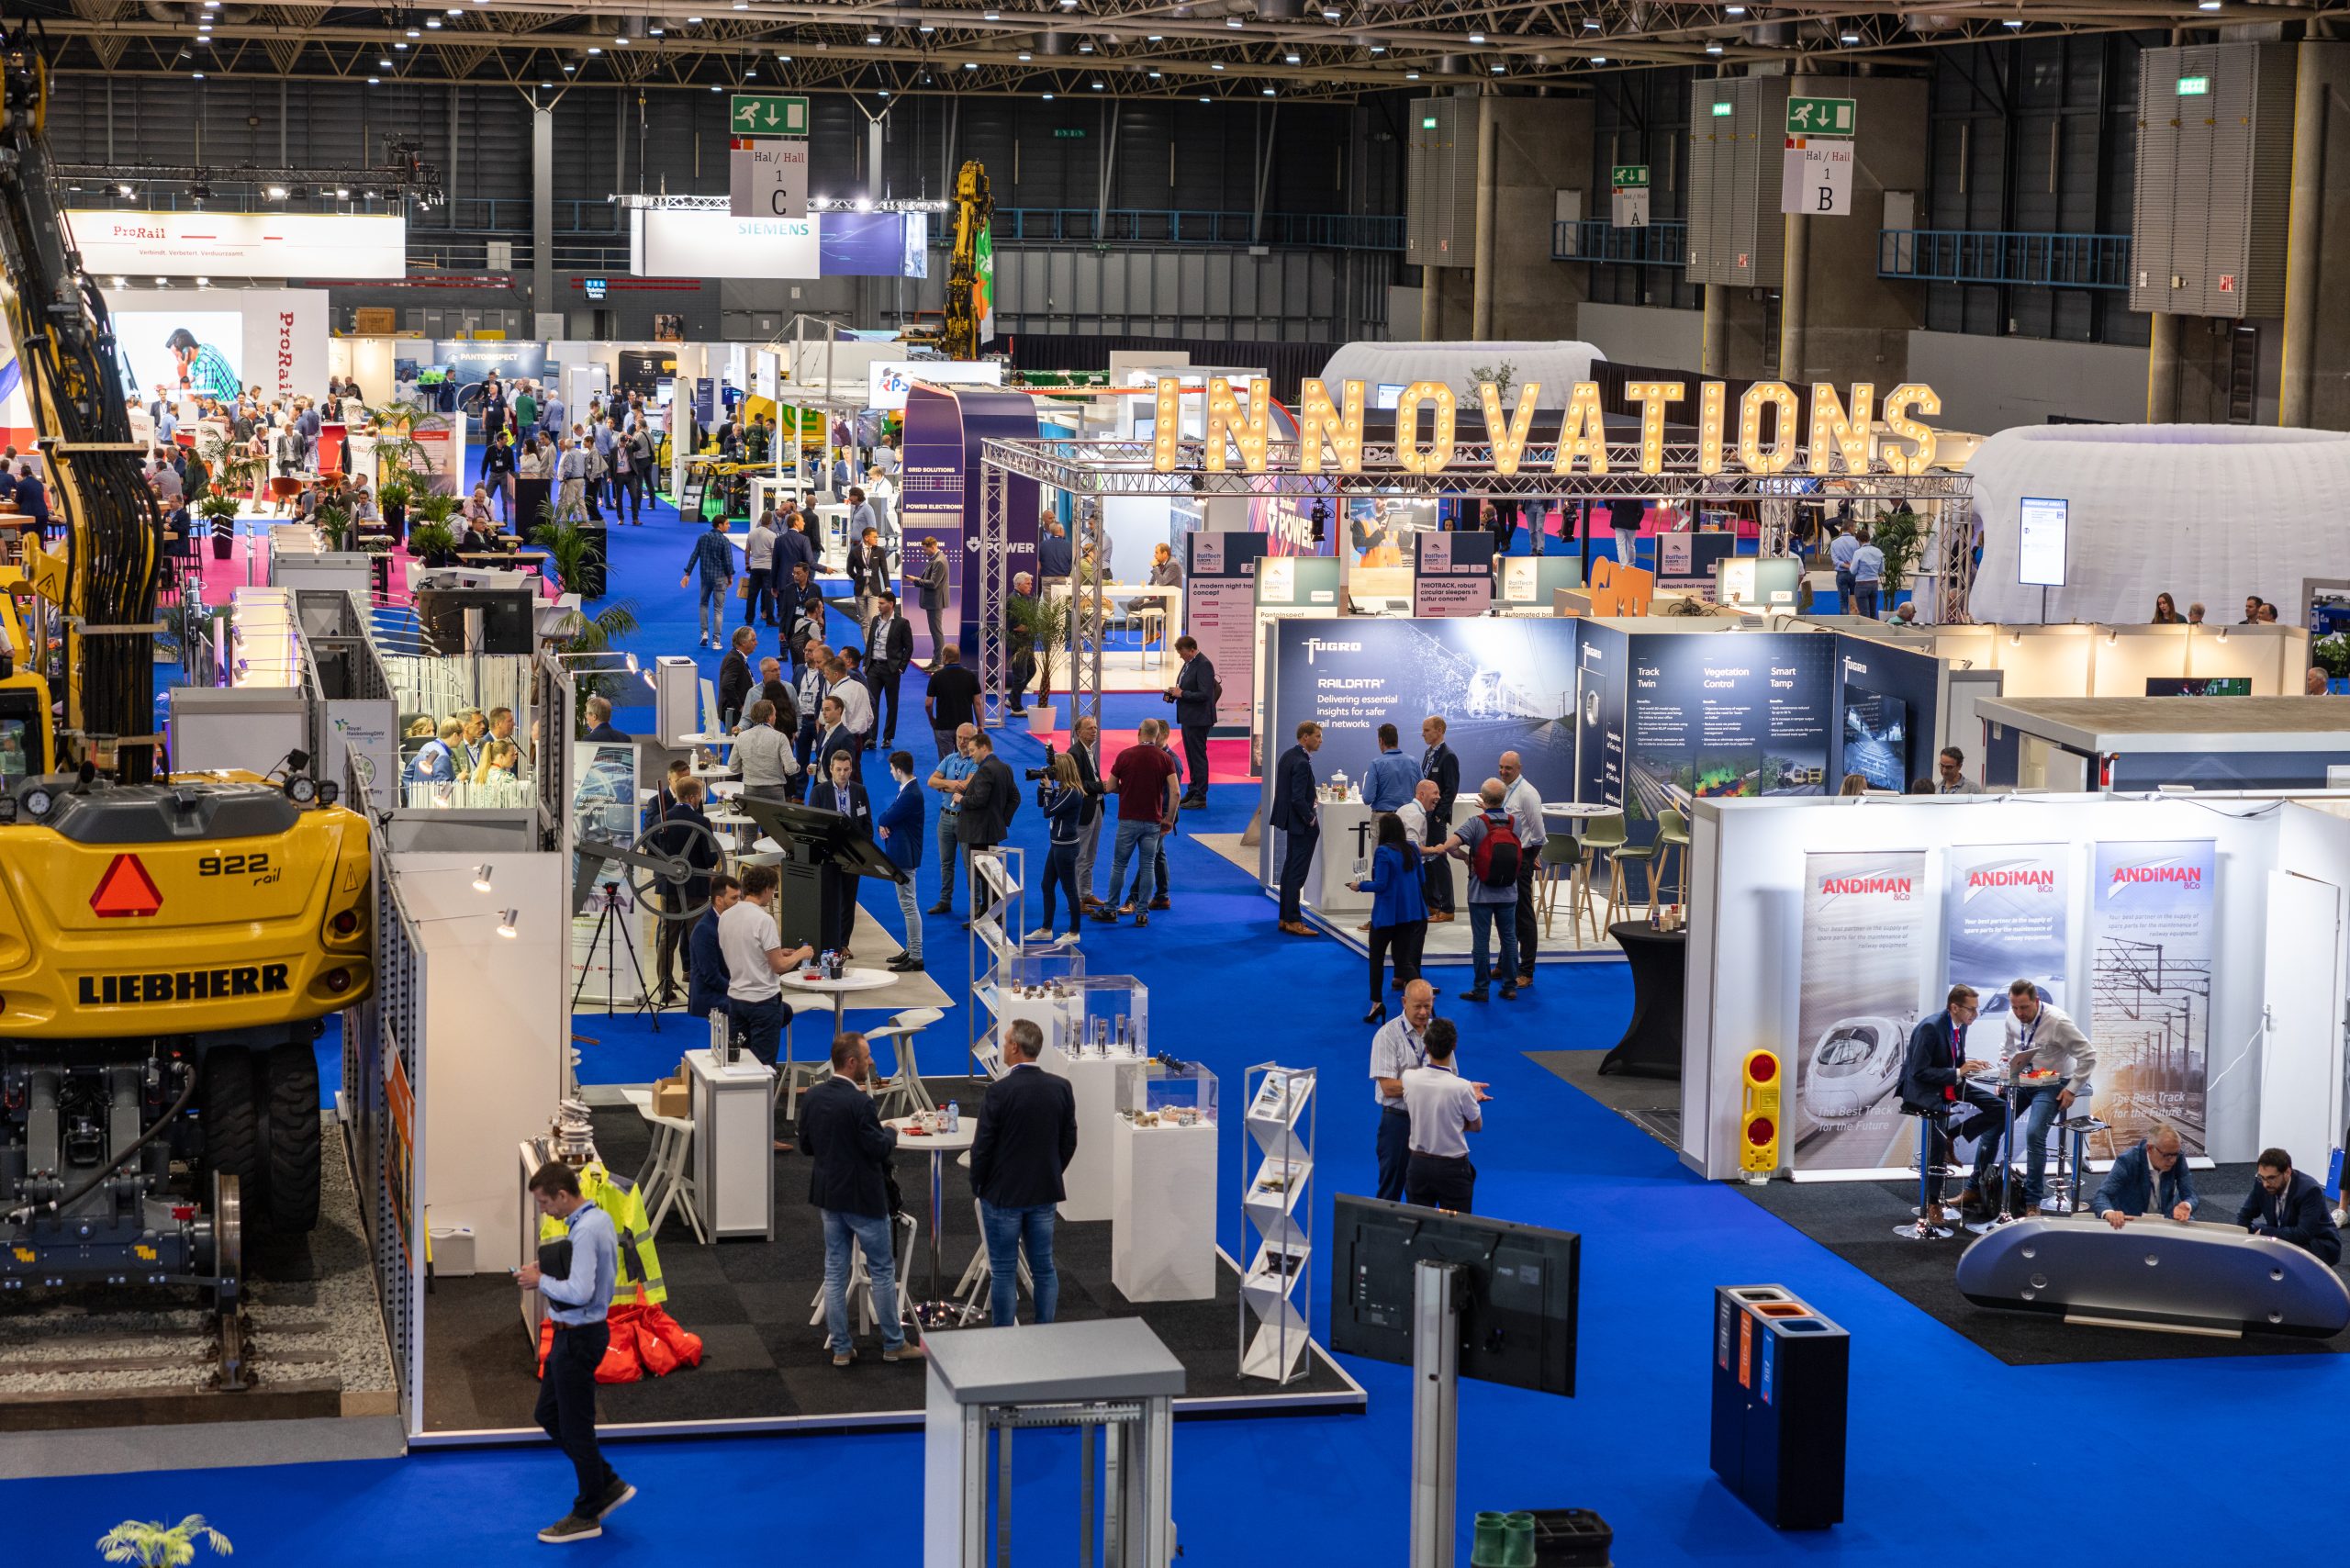 The exhibition floor of the RailTech Europe 2022 edition 